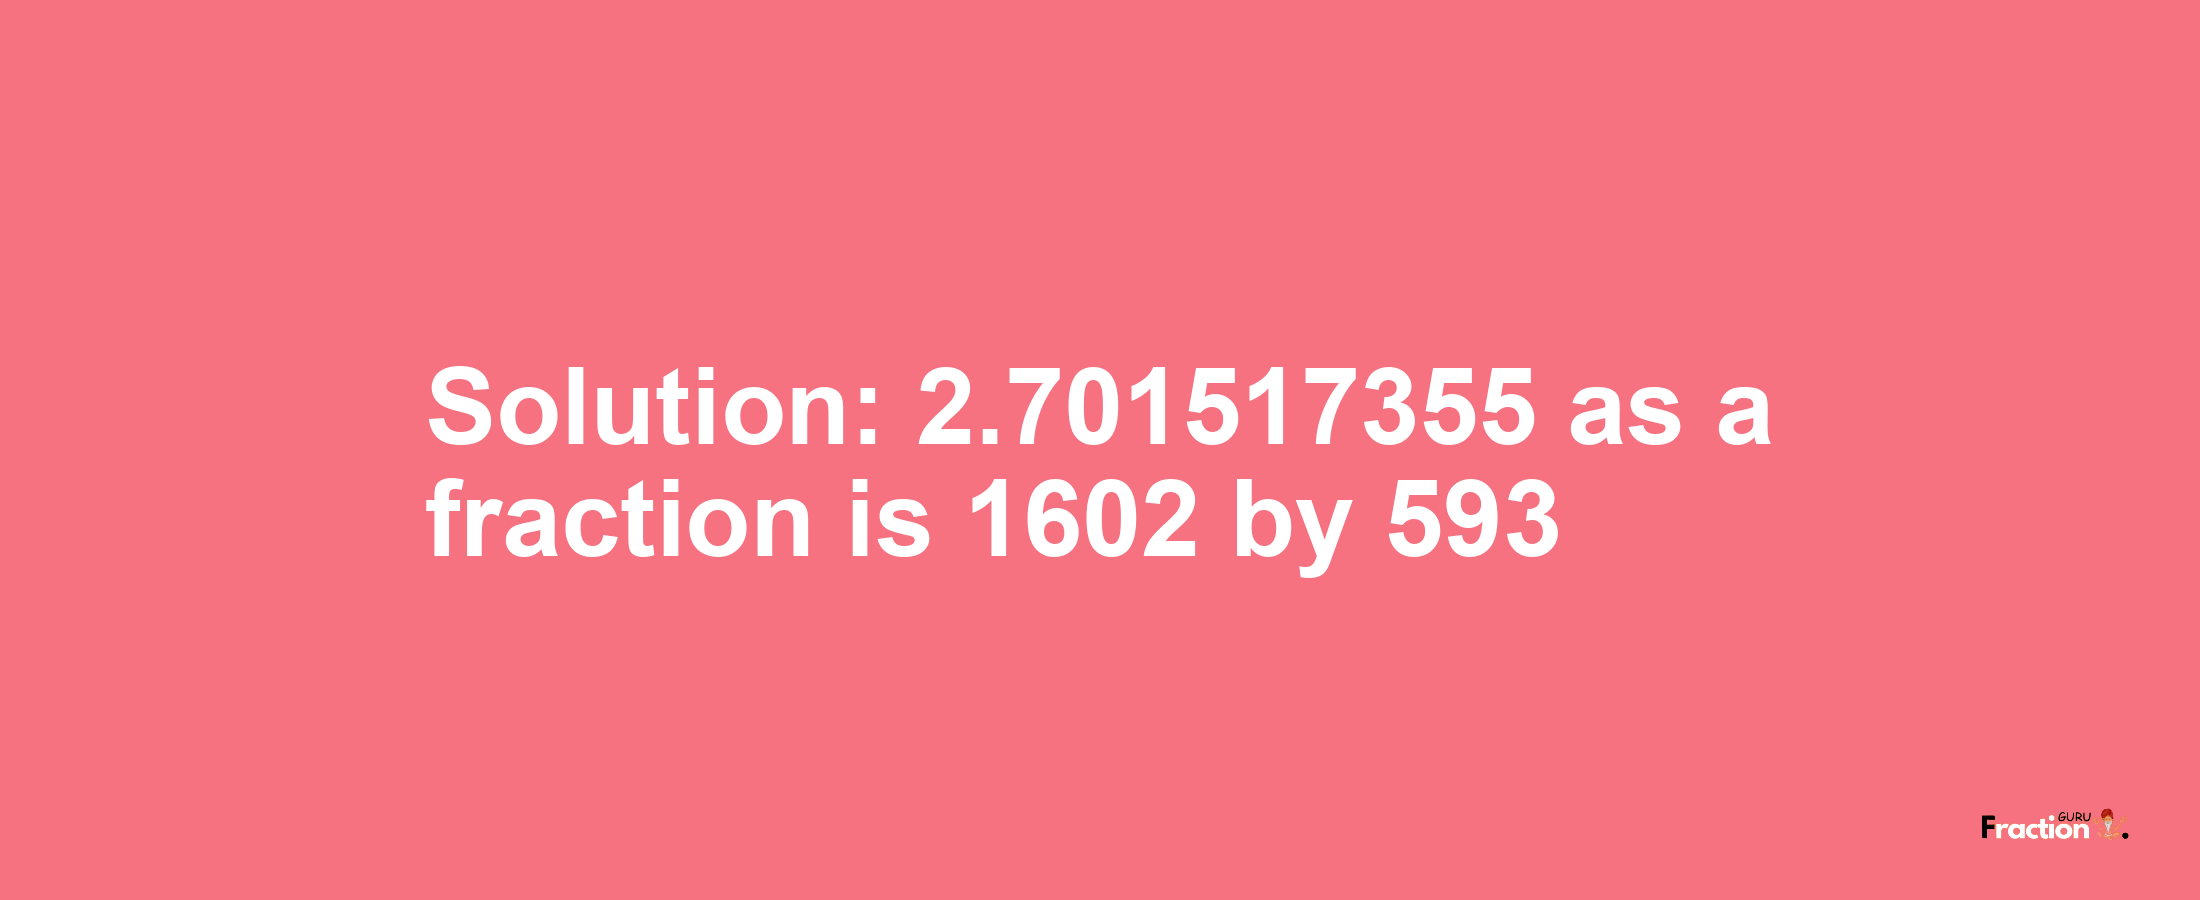 Solution:2.701517355 as a fraction is 1602/593